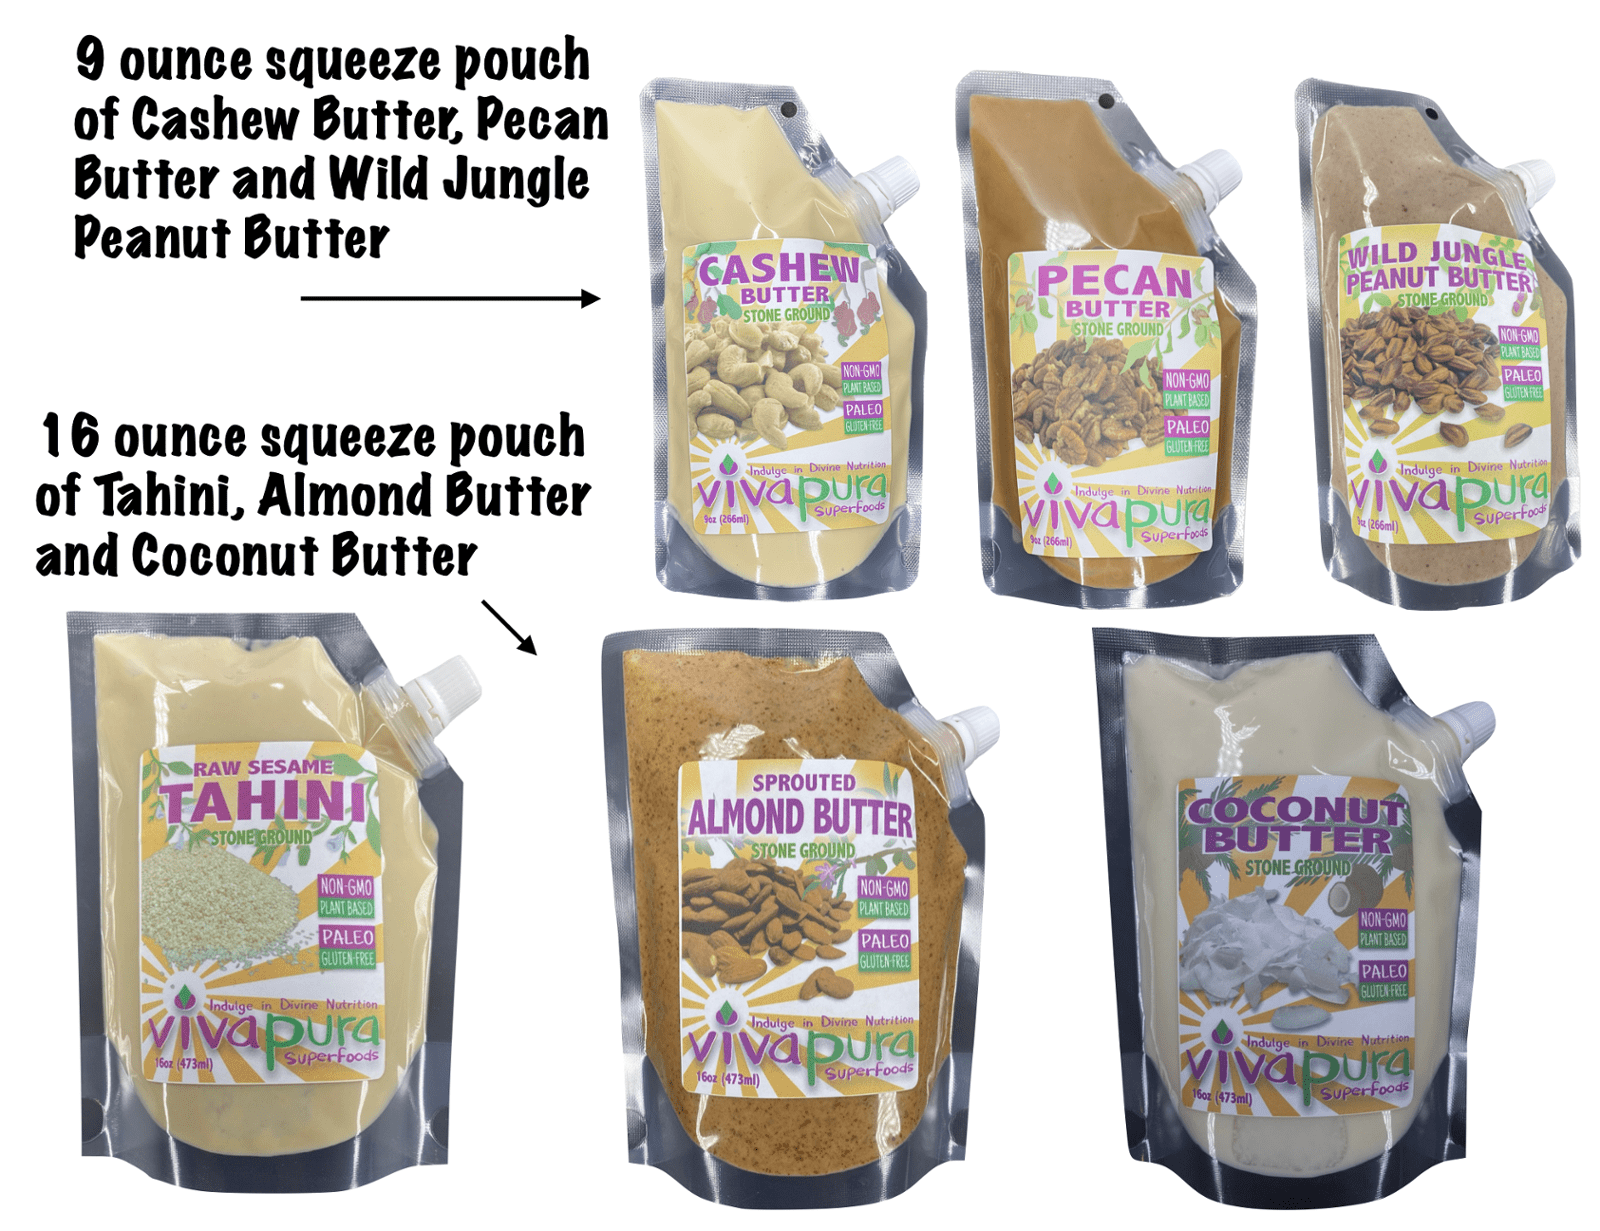 Plastic Squeeze Pouch vs. Glass Jars for Nut Butters